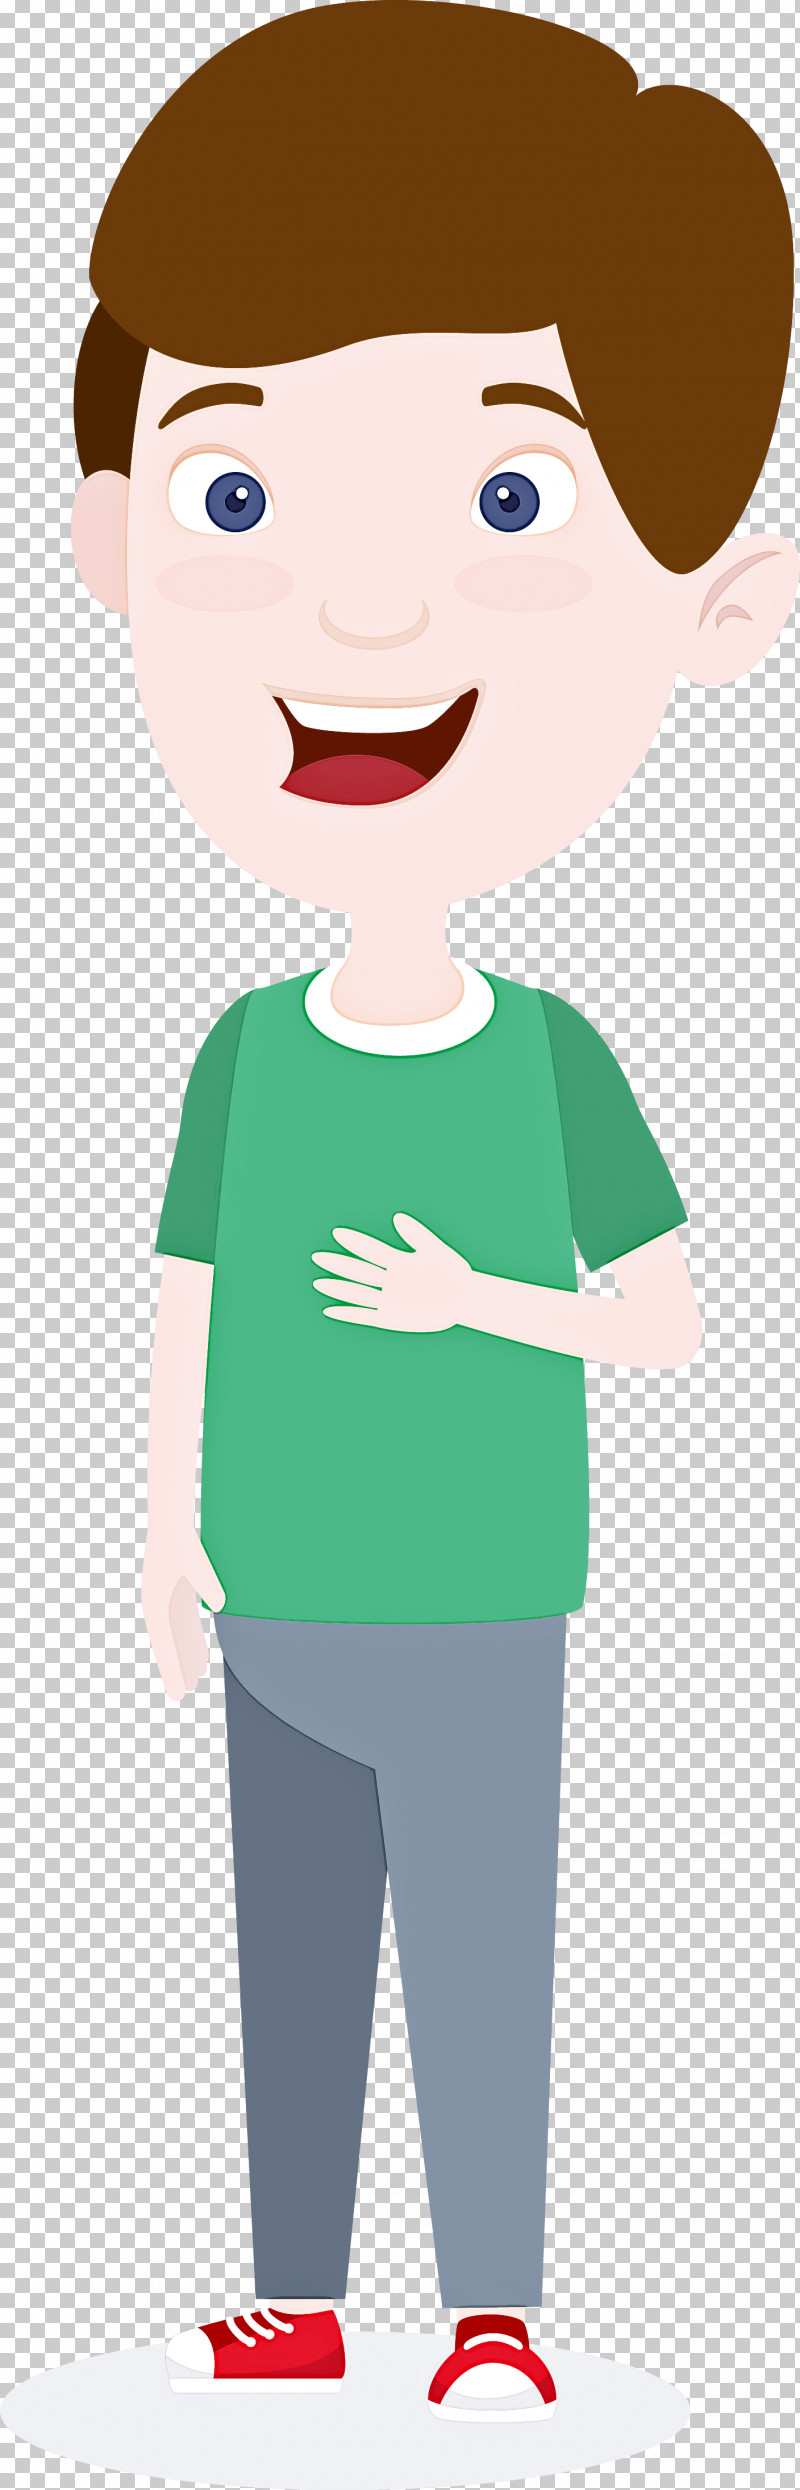 Green Cartoon T-shirt Sleeve Smile PNG, Clipart, Animation, Cartoon, Child, Finger, Gesture Free PNG Download